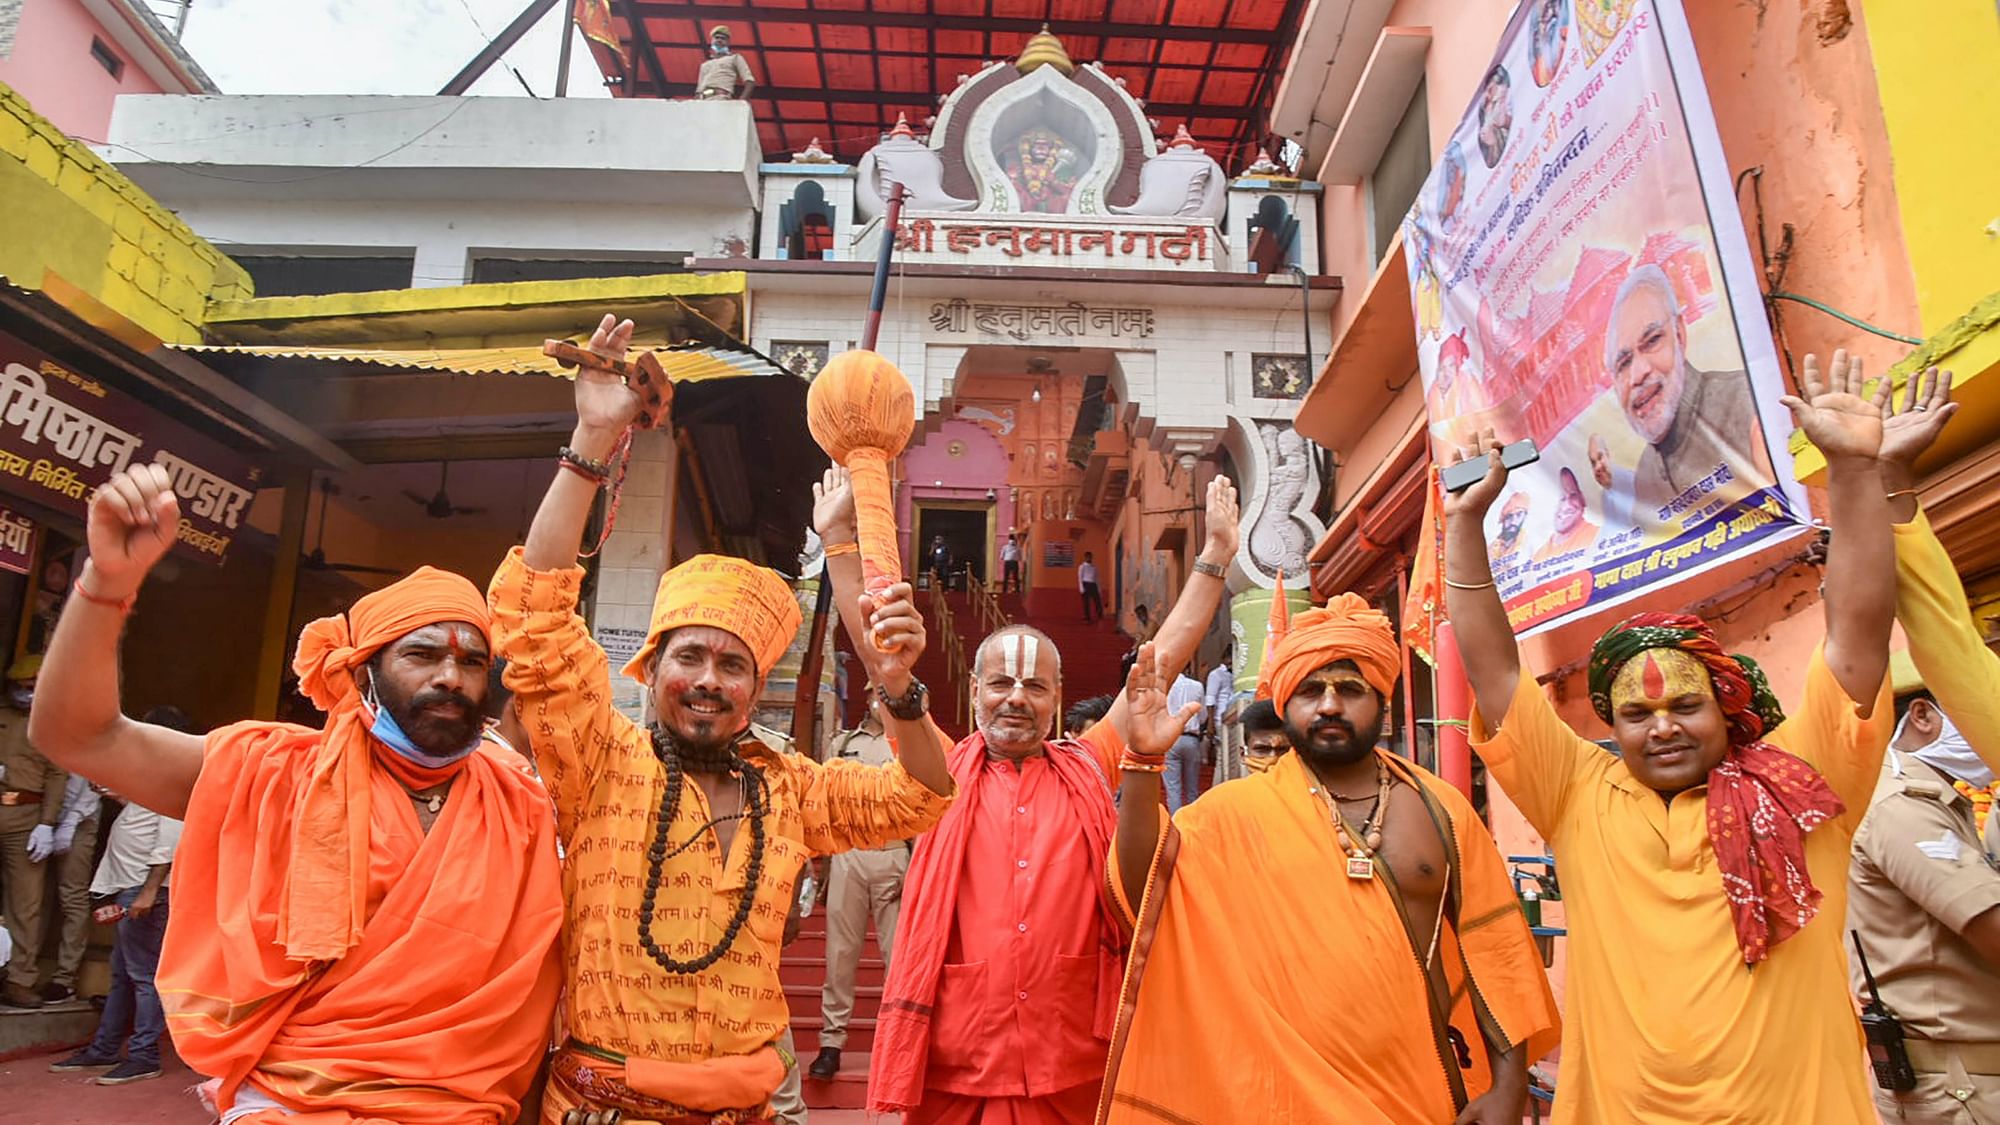 Sadhus celebrate the Bhoomi Pujan day for the construction of Ram Temple, at Hanuman Garhi in Ayodhya, Wednesday, 5 August.